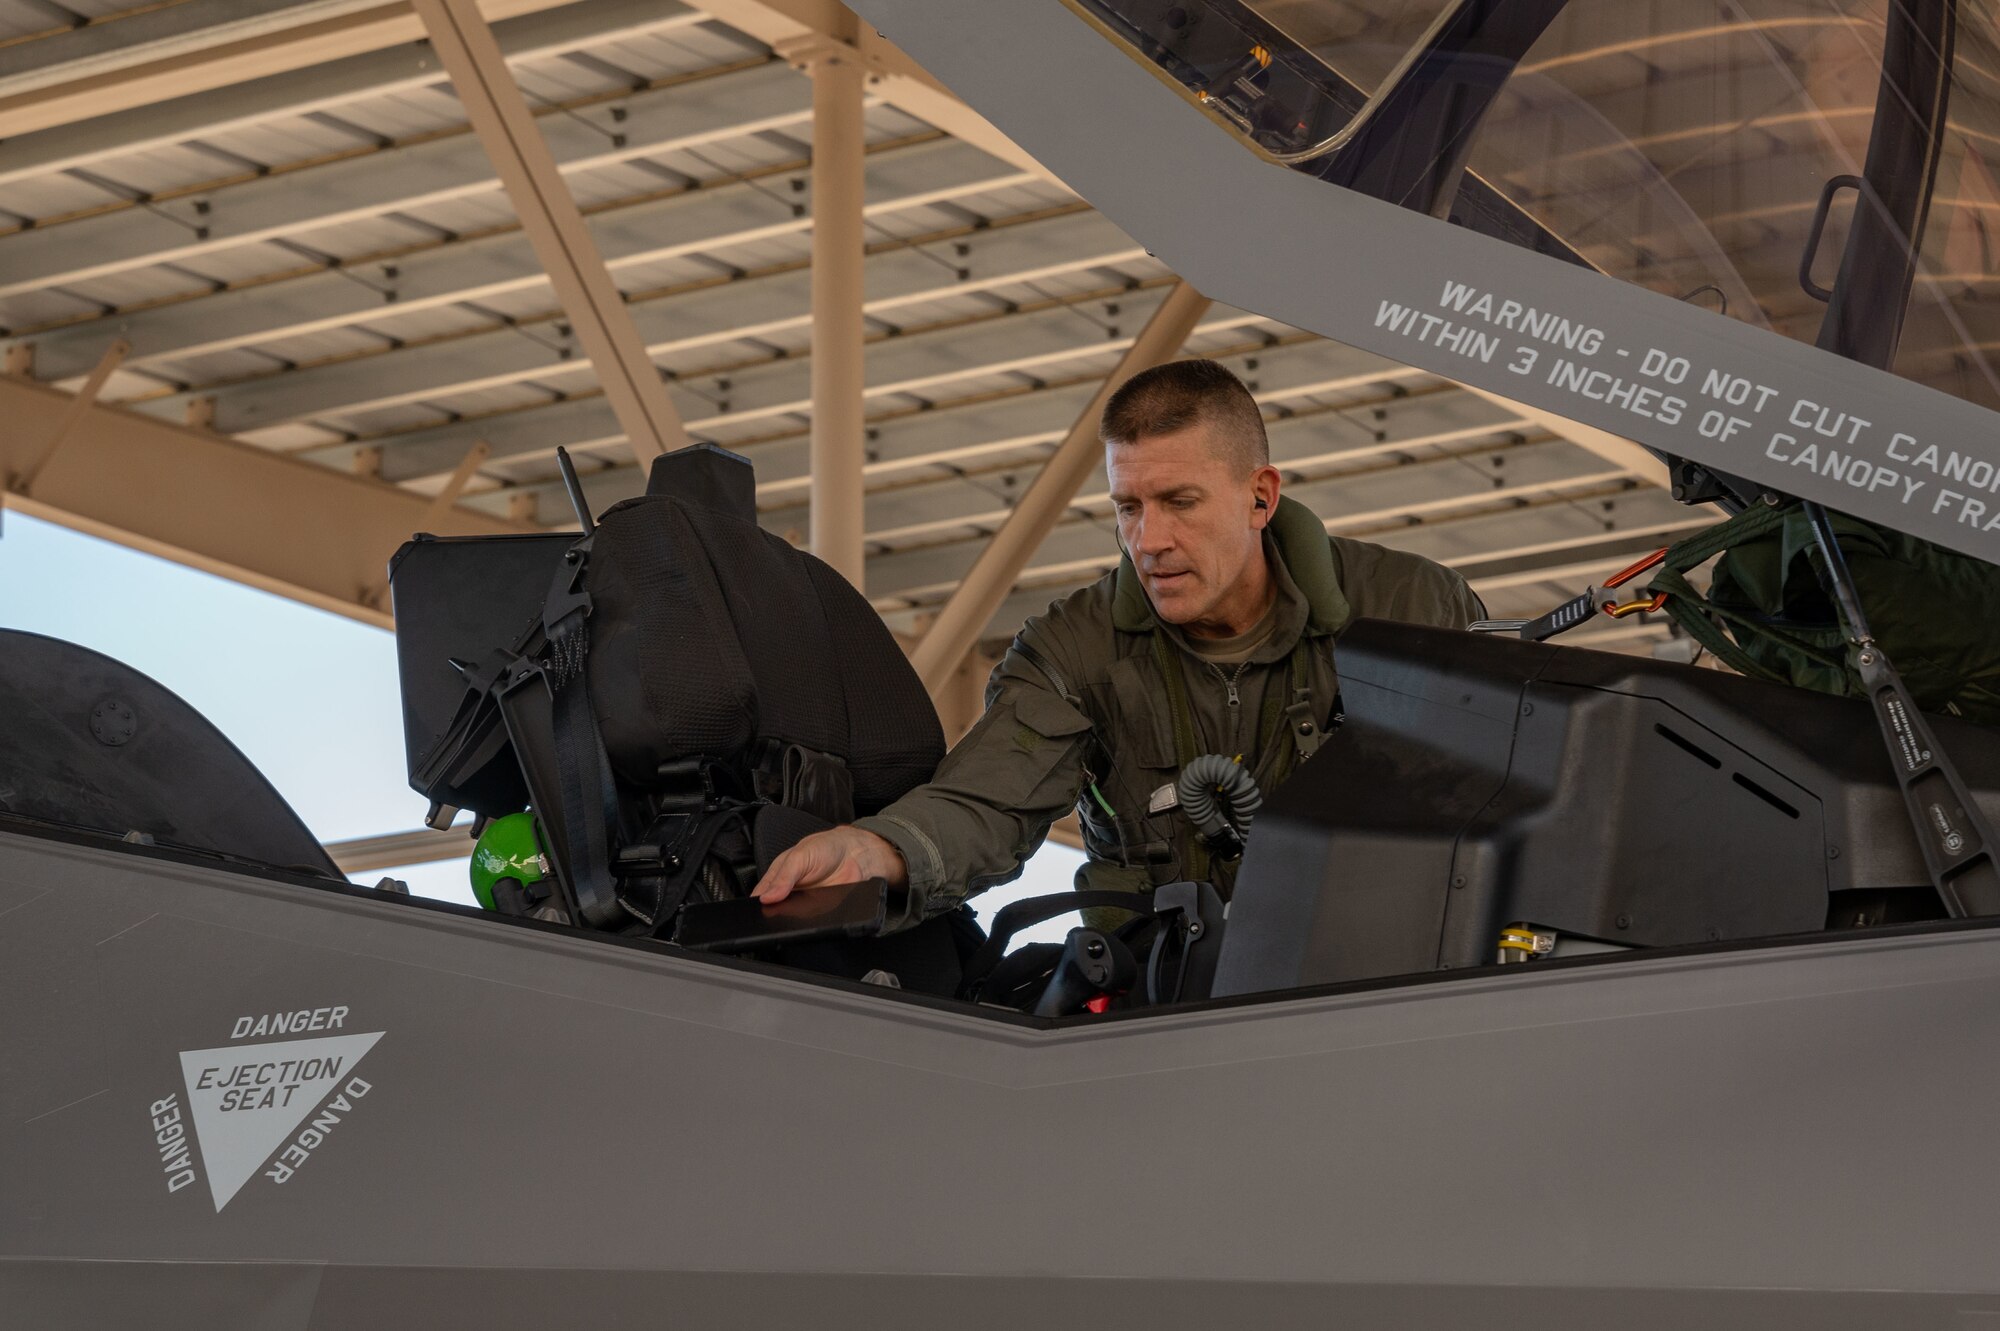 Brig. Gen. Michael Rawls, Air Force Operational Test and Evaluation Center commander, performs a pre-flight check on an F-35A Lightning II at Nellis Air Force Base, Nevada, Jan. 12, 2023. Brig. Gen. Rawls is the first general officer to be certified as a fifth-generation aggressor pilot. (U.S. Air Force photo by Airman 1st Class Jordan McCoy)